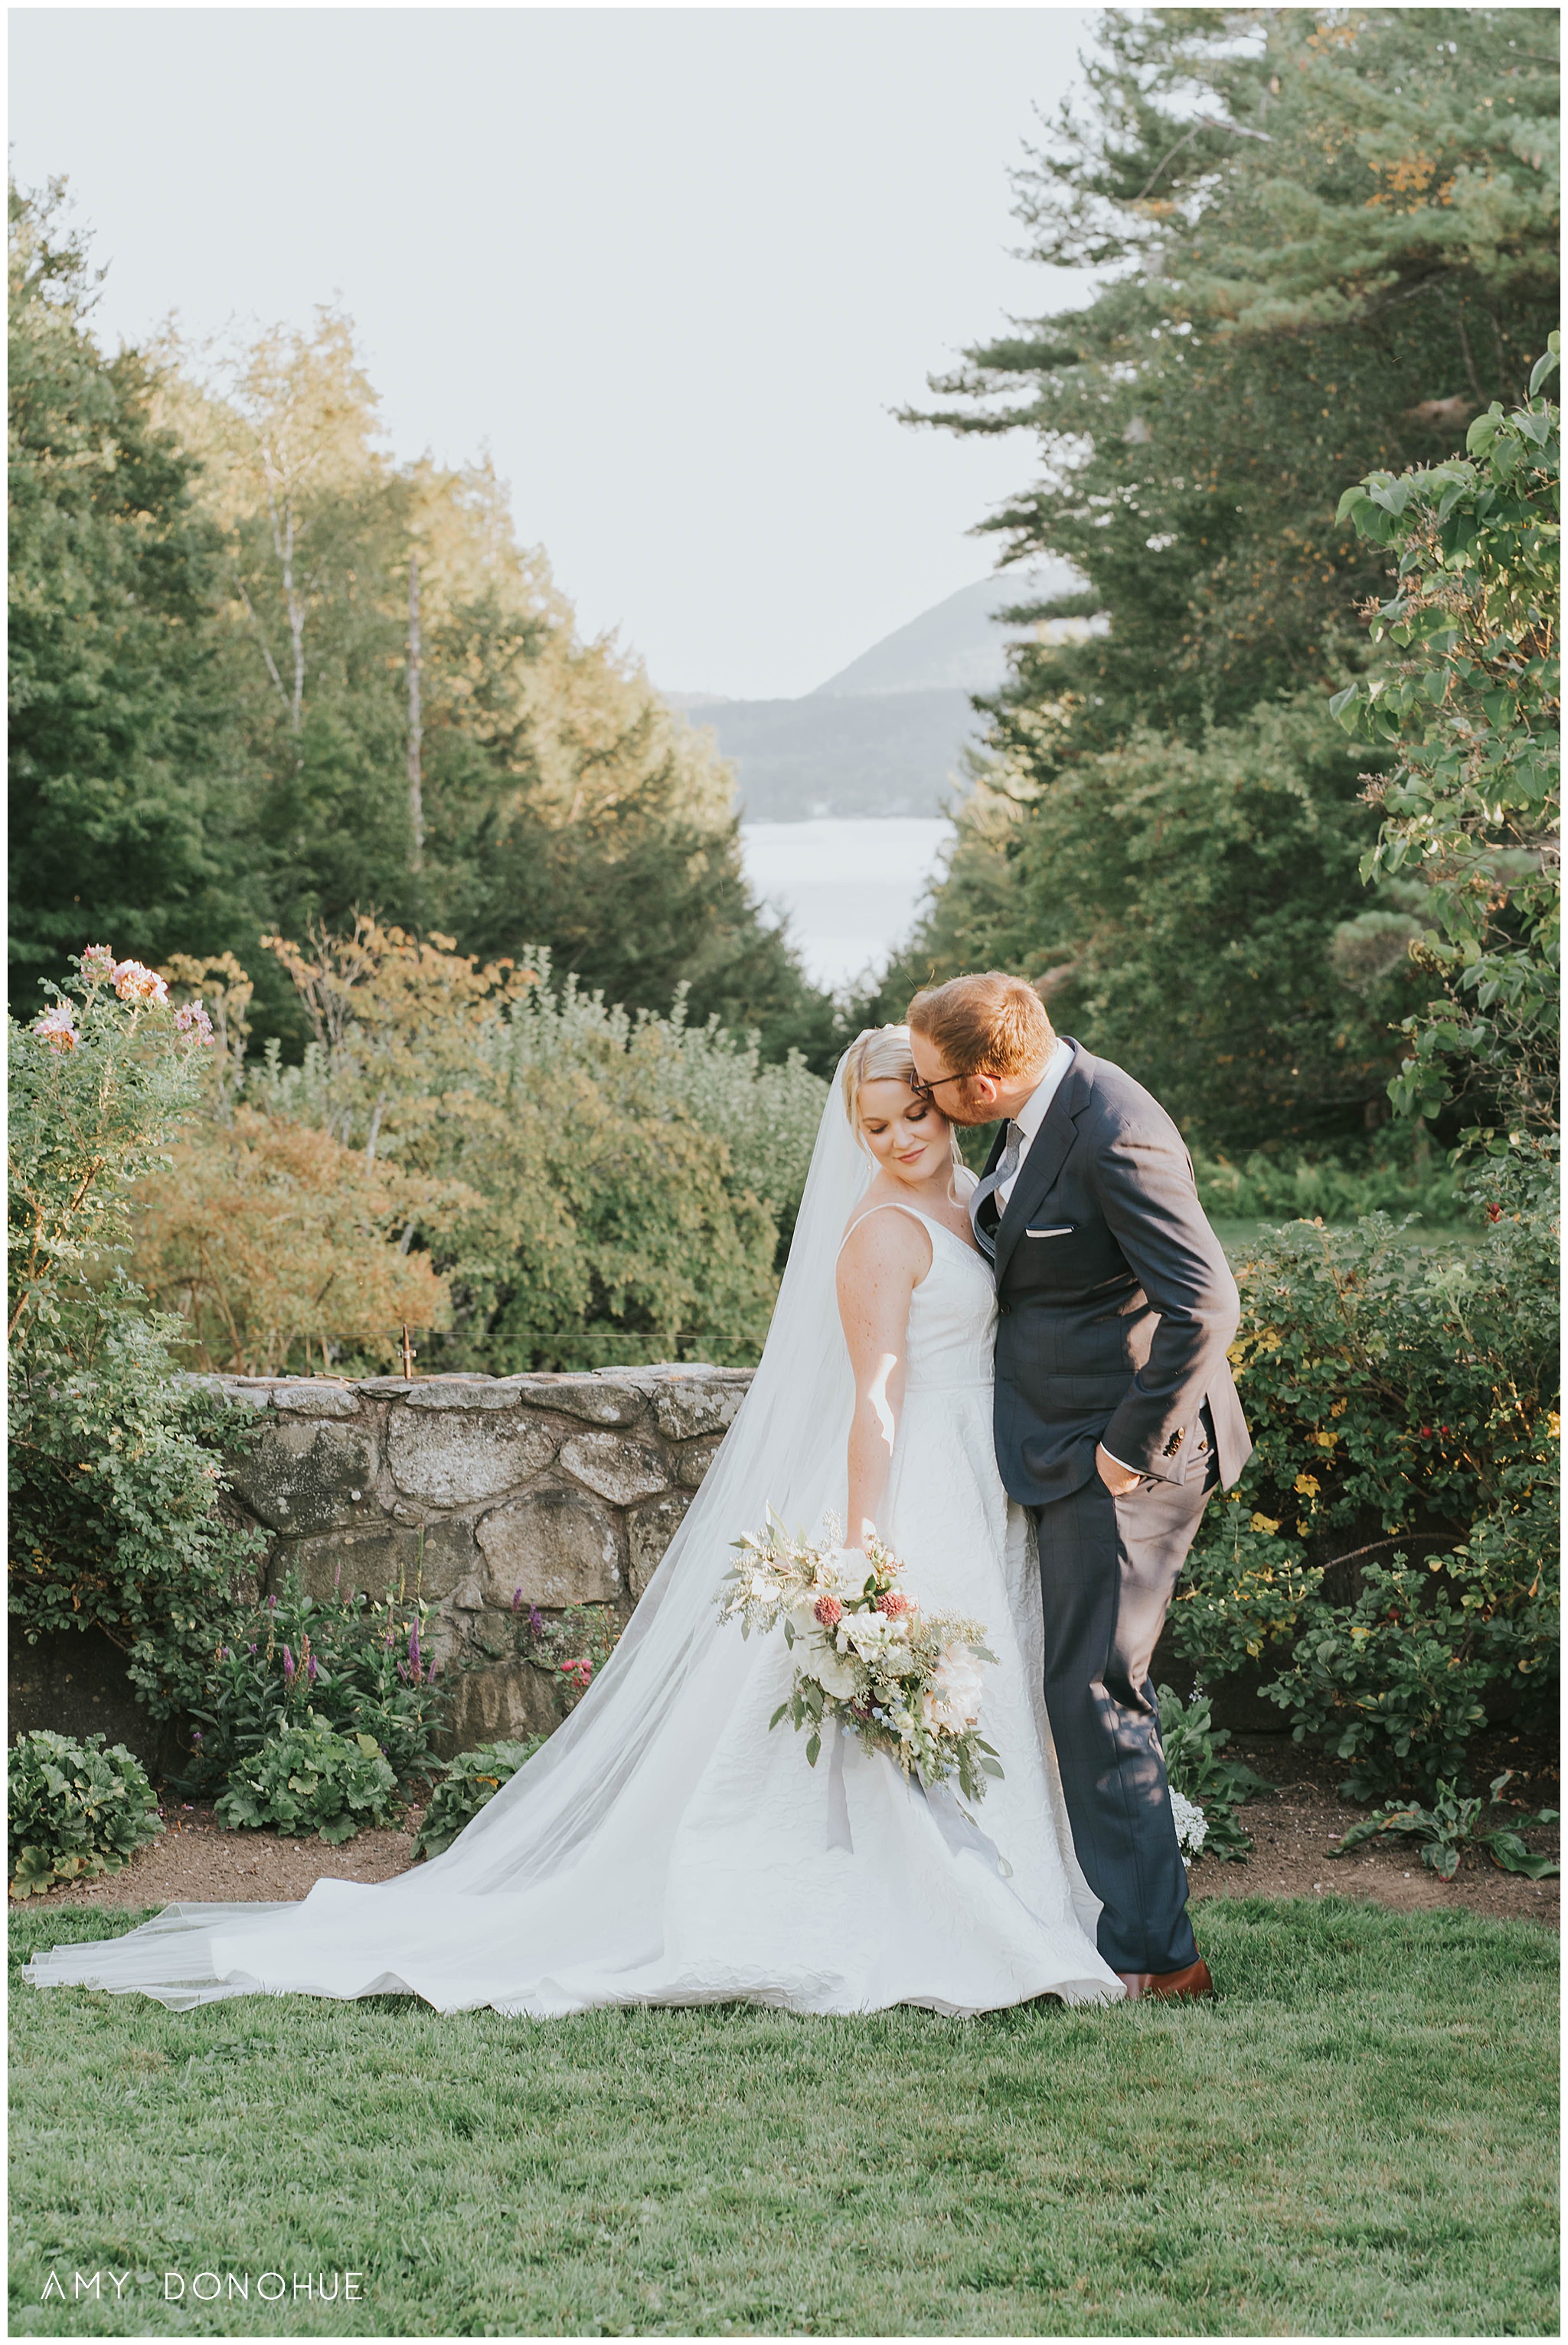 Bride & Groom Portraits | The Fells Estate | The Prism House Event Design & Wedding Planning | New Hampshire Wedding Photographer | © Amy Donohue Photography